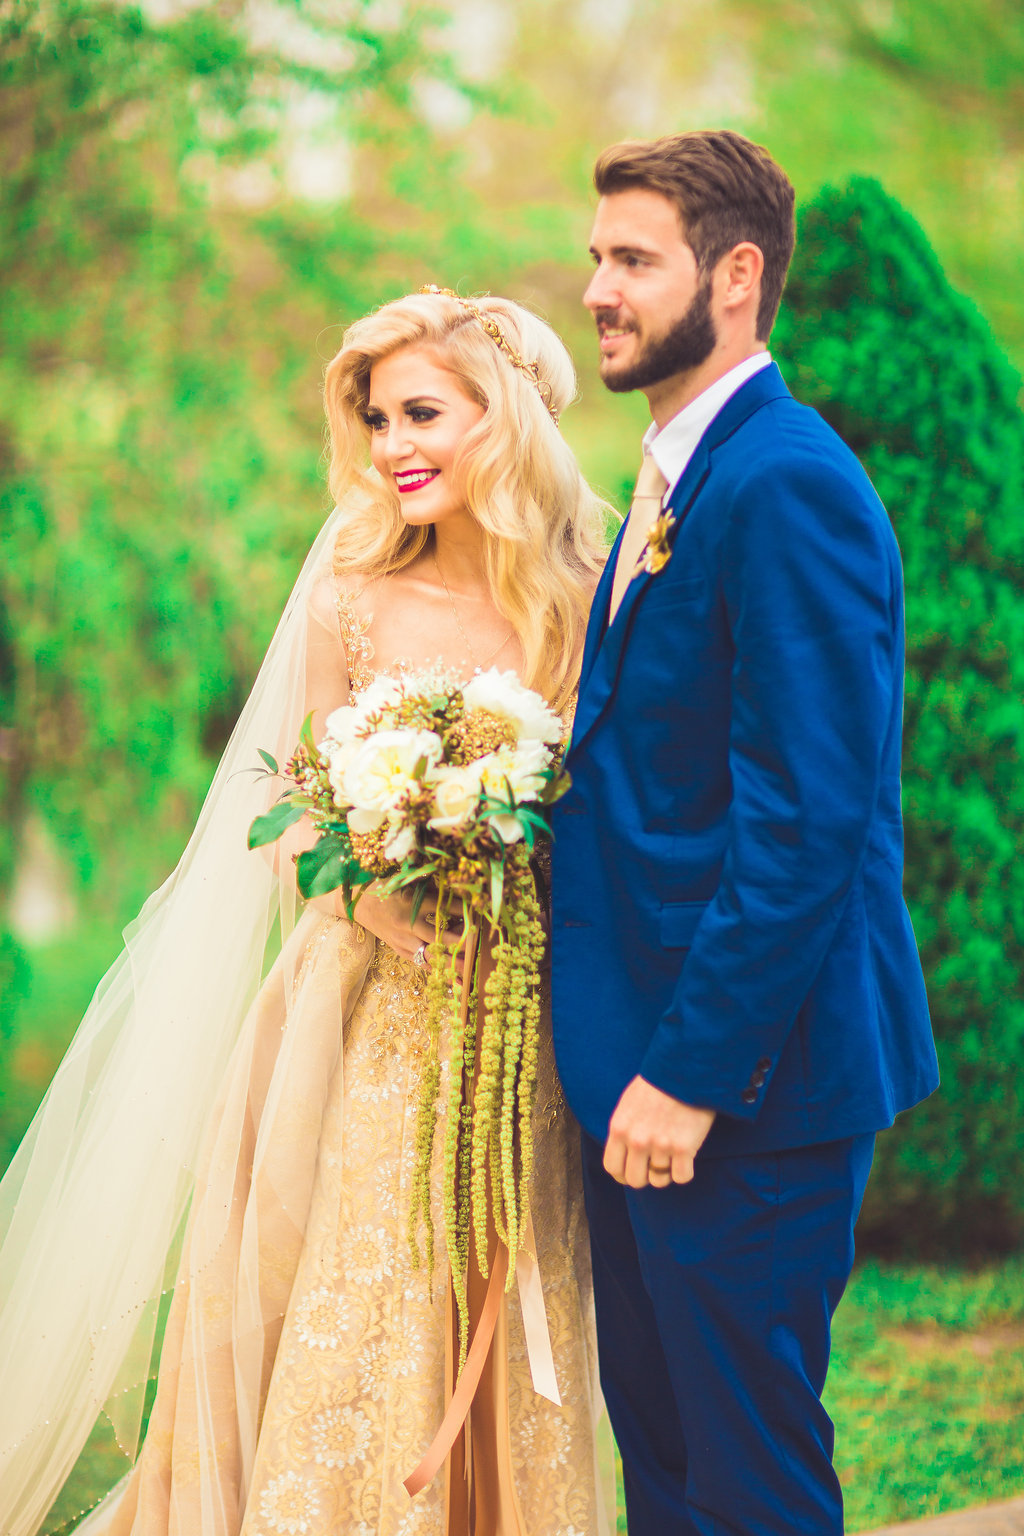 Wedding Photograph Of Bride and Groom in Blue Suit Posing for a Camera Shot Los Angeles